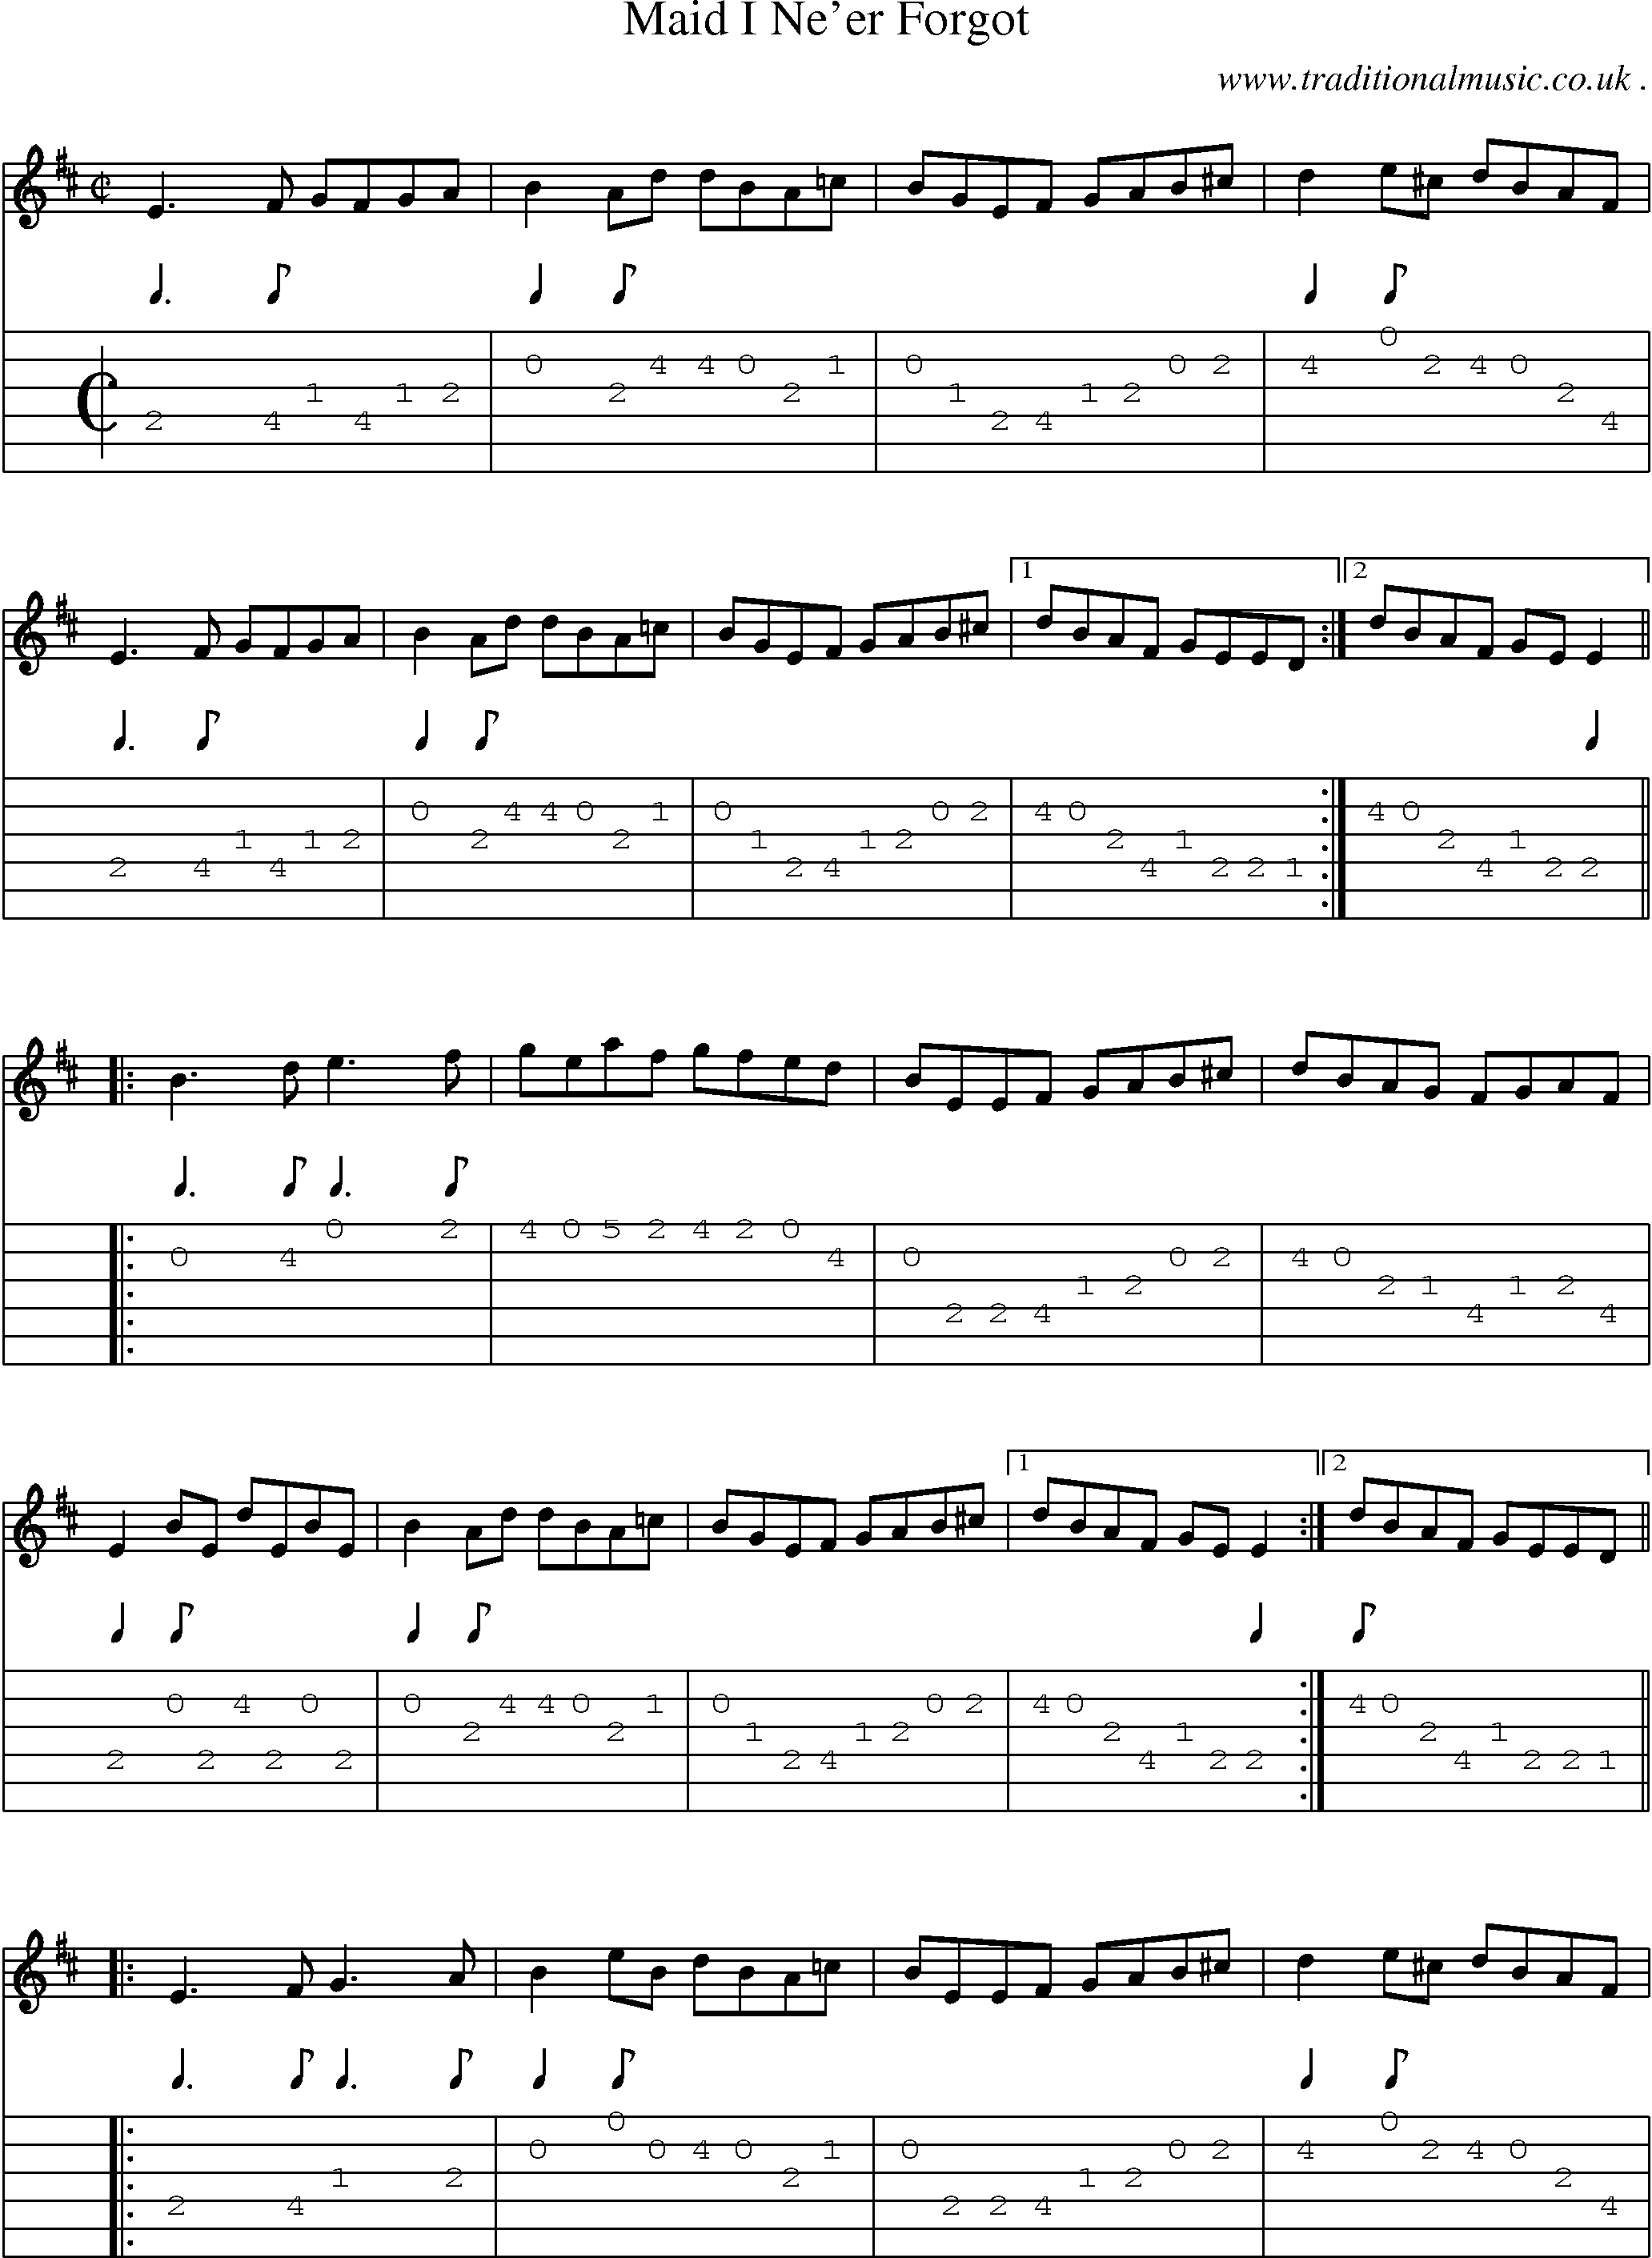 Sheet-Music and Guitar Tabs for Maid I Neer Forgot